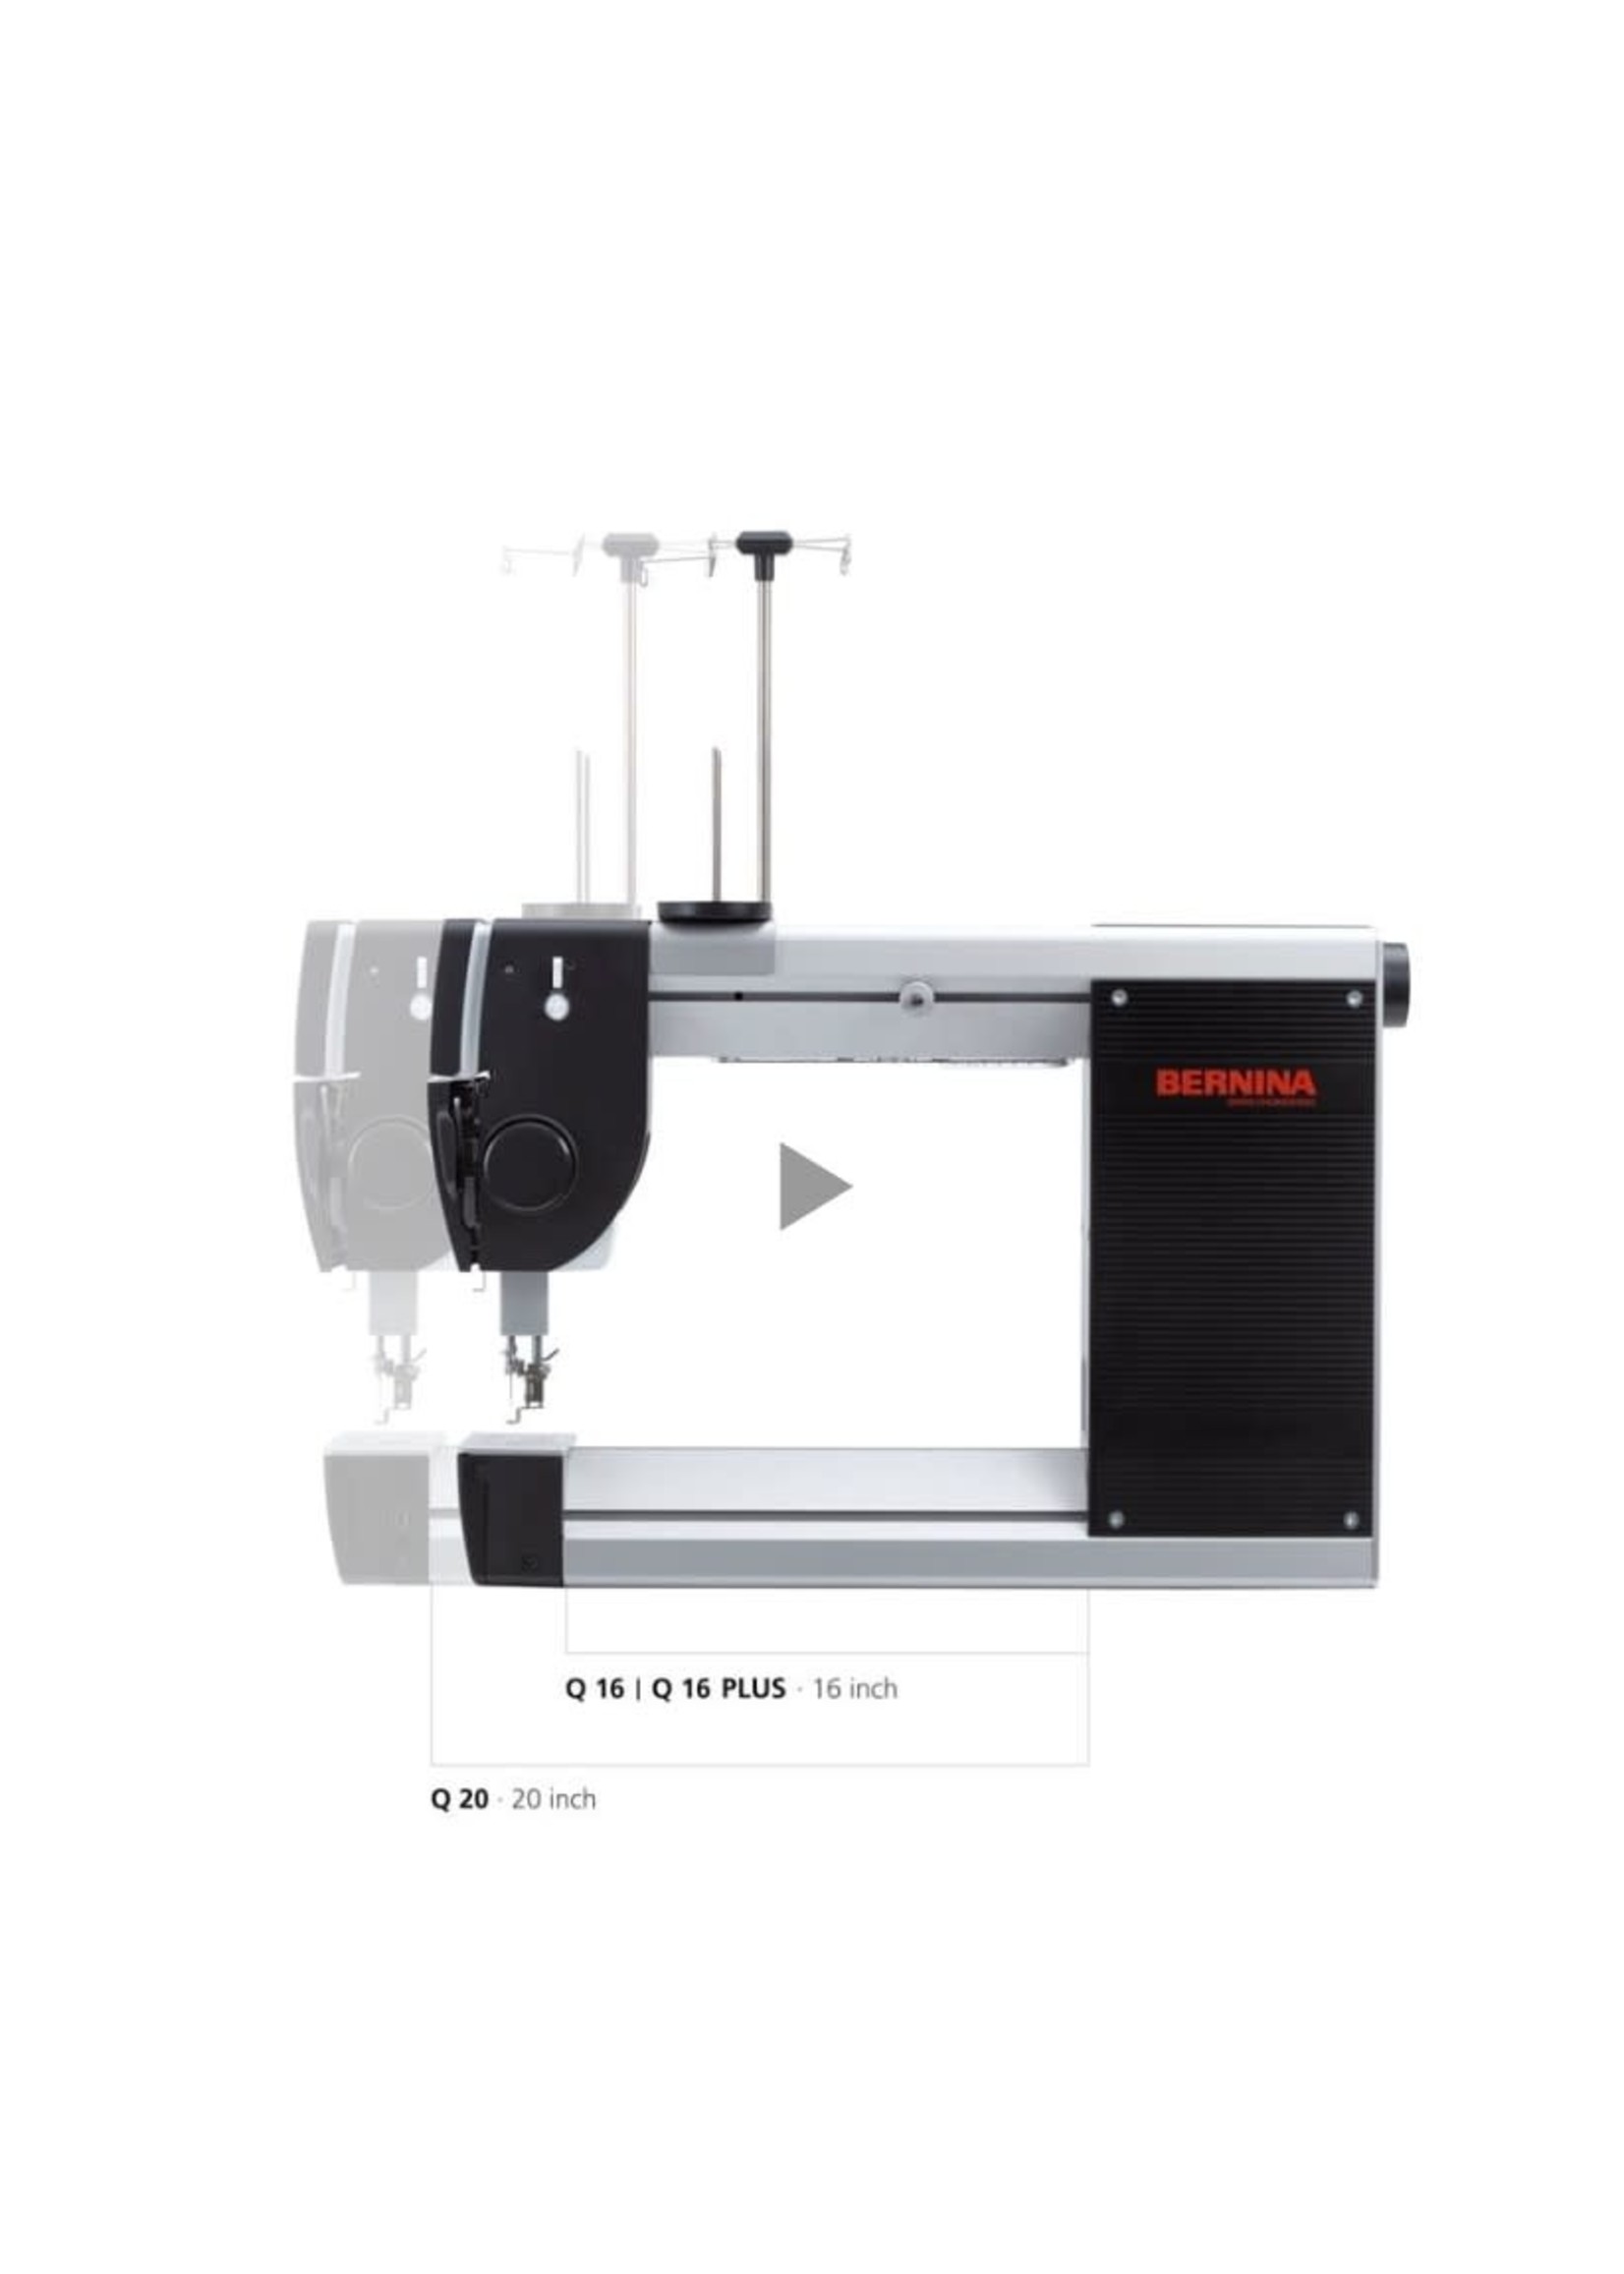 Bernina Bernina Q16 with foldable table - AVAILABLE FOR IN-STORE PURCHASE ONLY